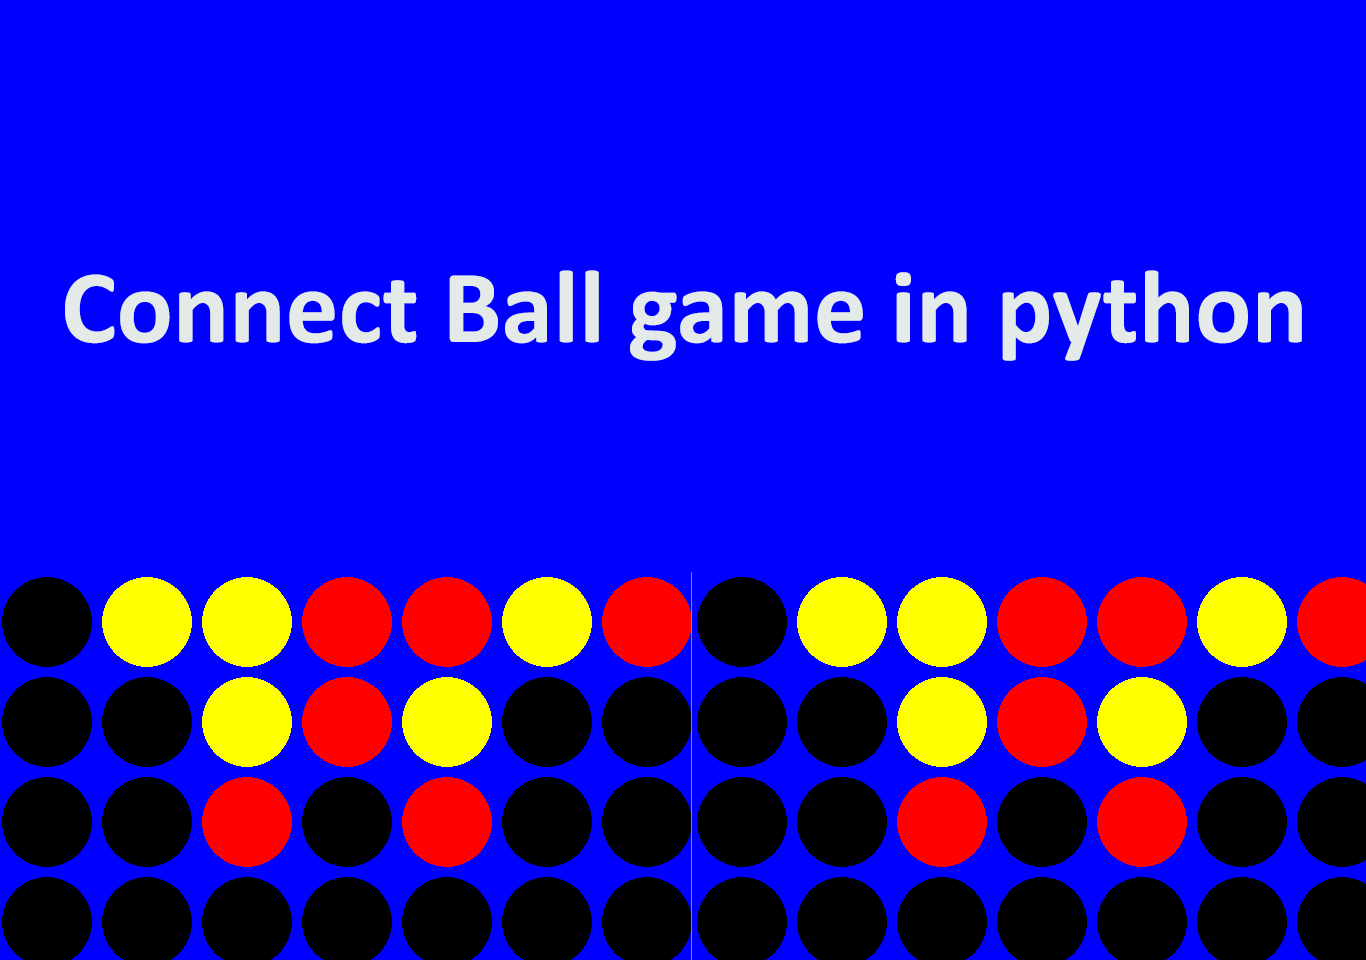 Connect ball game in python